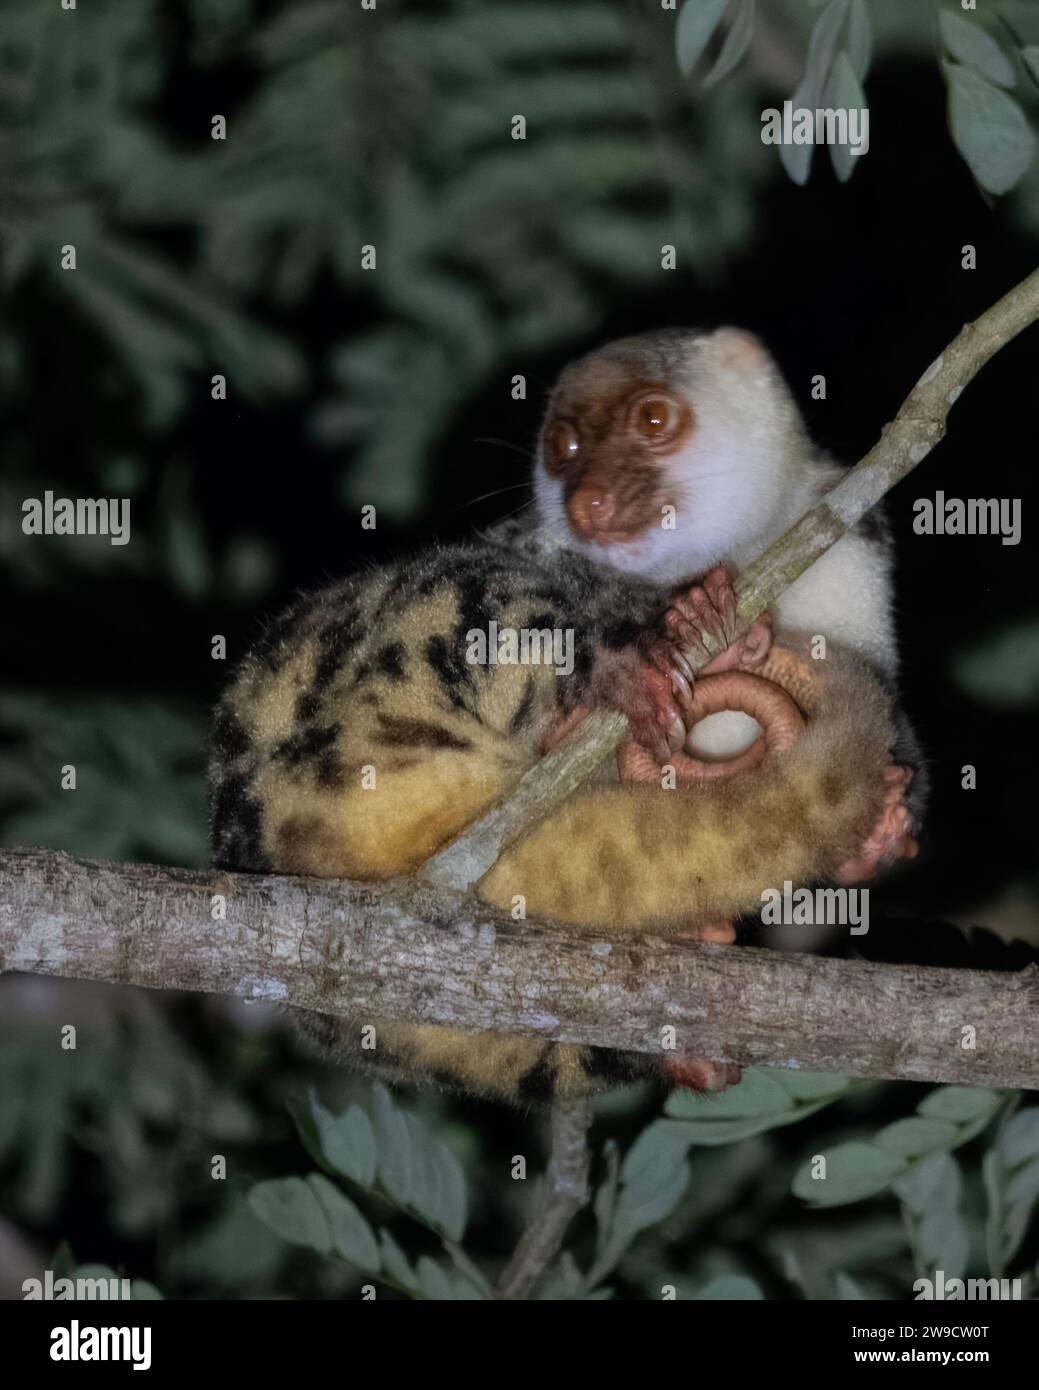 Waigeou cuscus or Waigeou spotted cuscus seen in Waigeo in West Papua,Indonesia Stock Photo